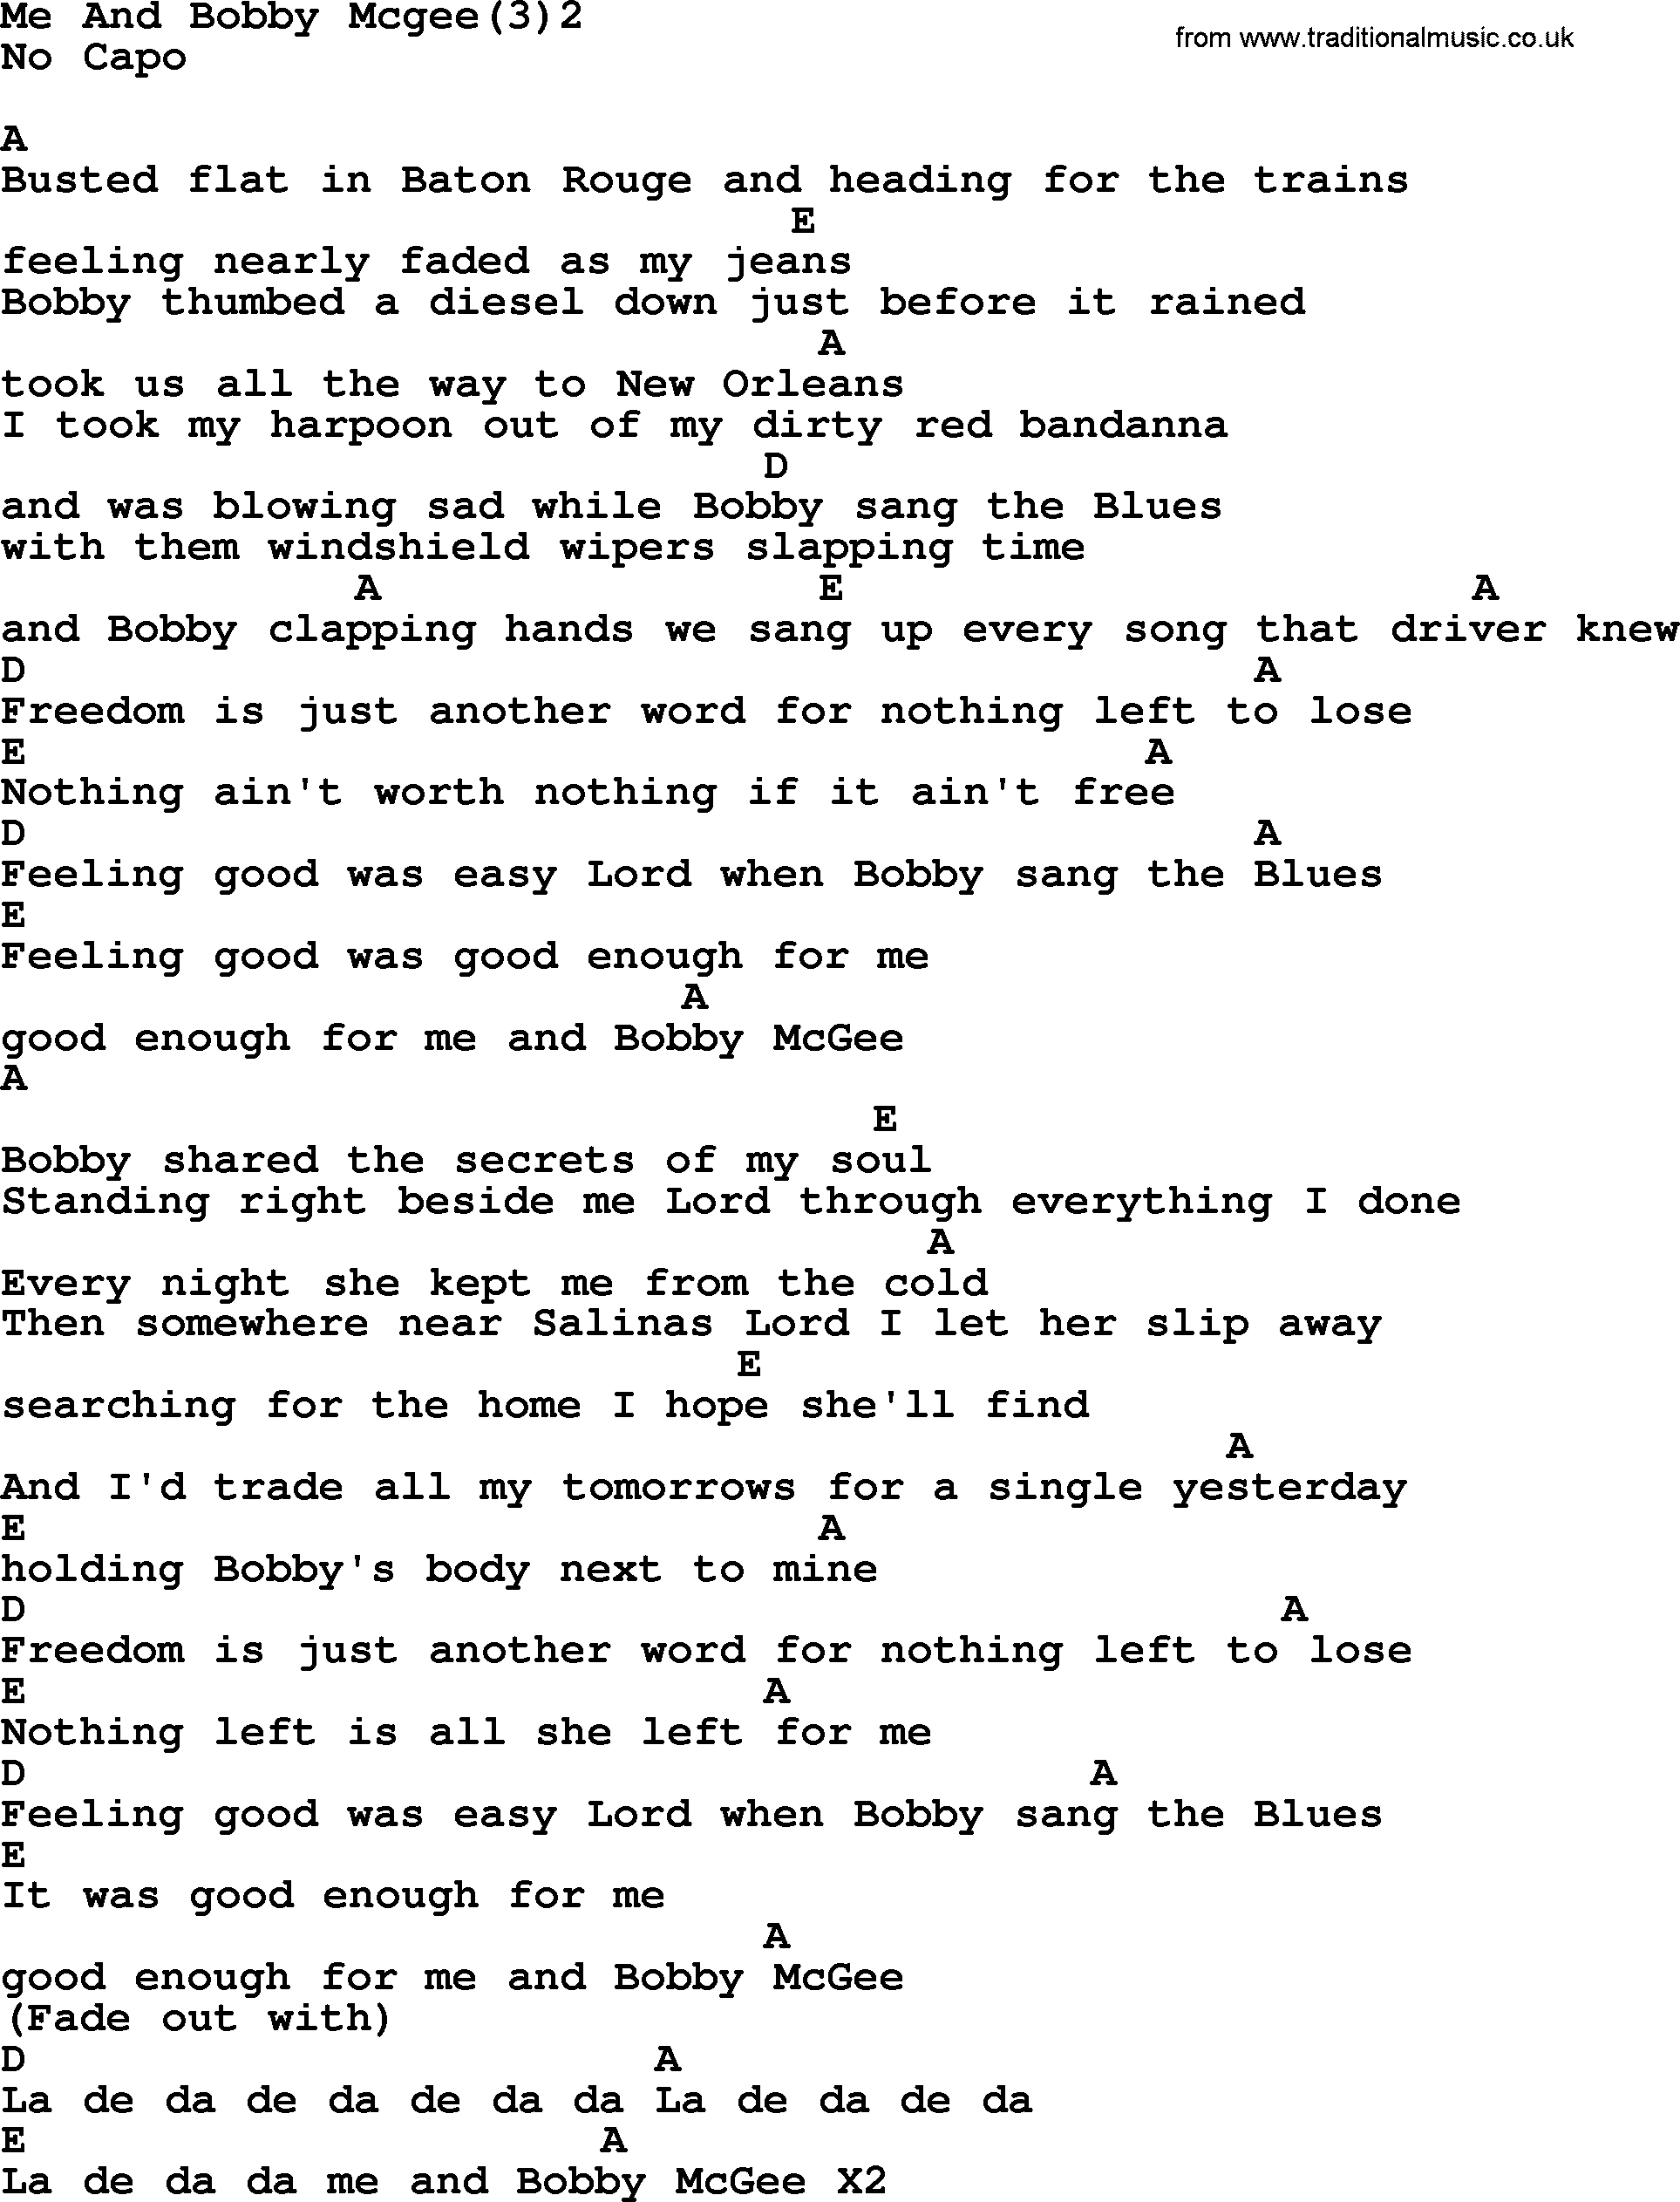 Me And Bobby Mcgee Chords Kris Kristofferson Song Me And Bob Mcgee32 Lyrics And Chords